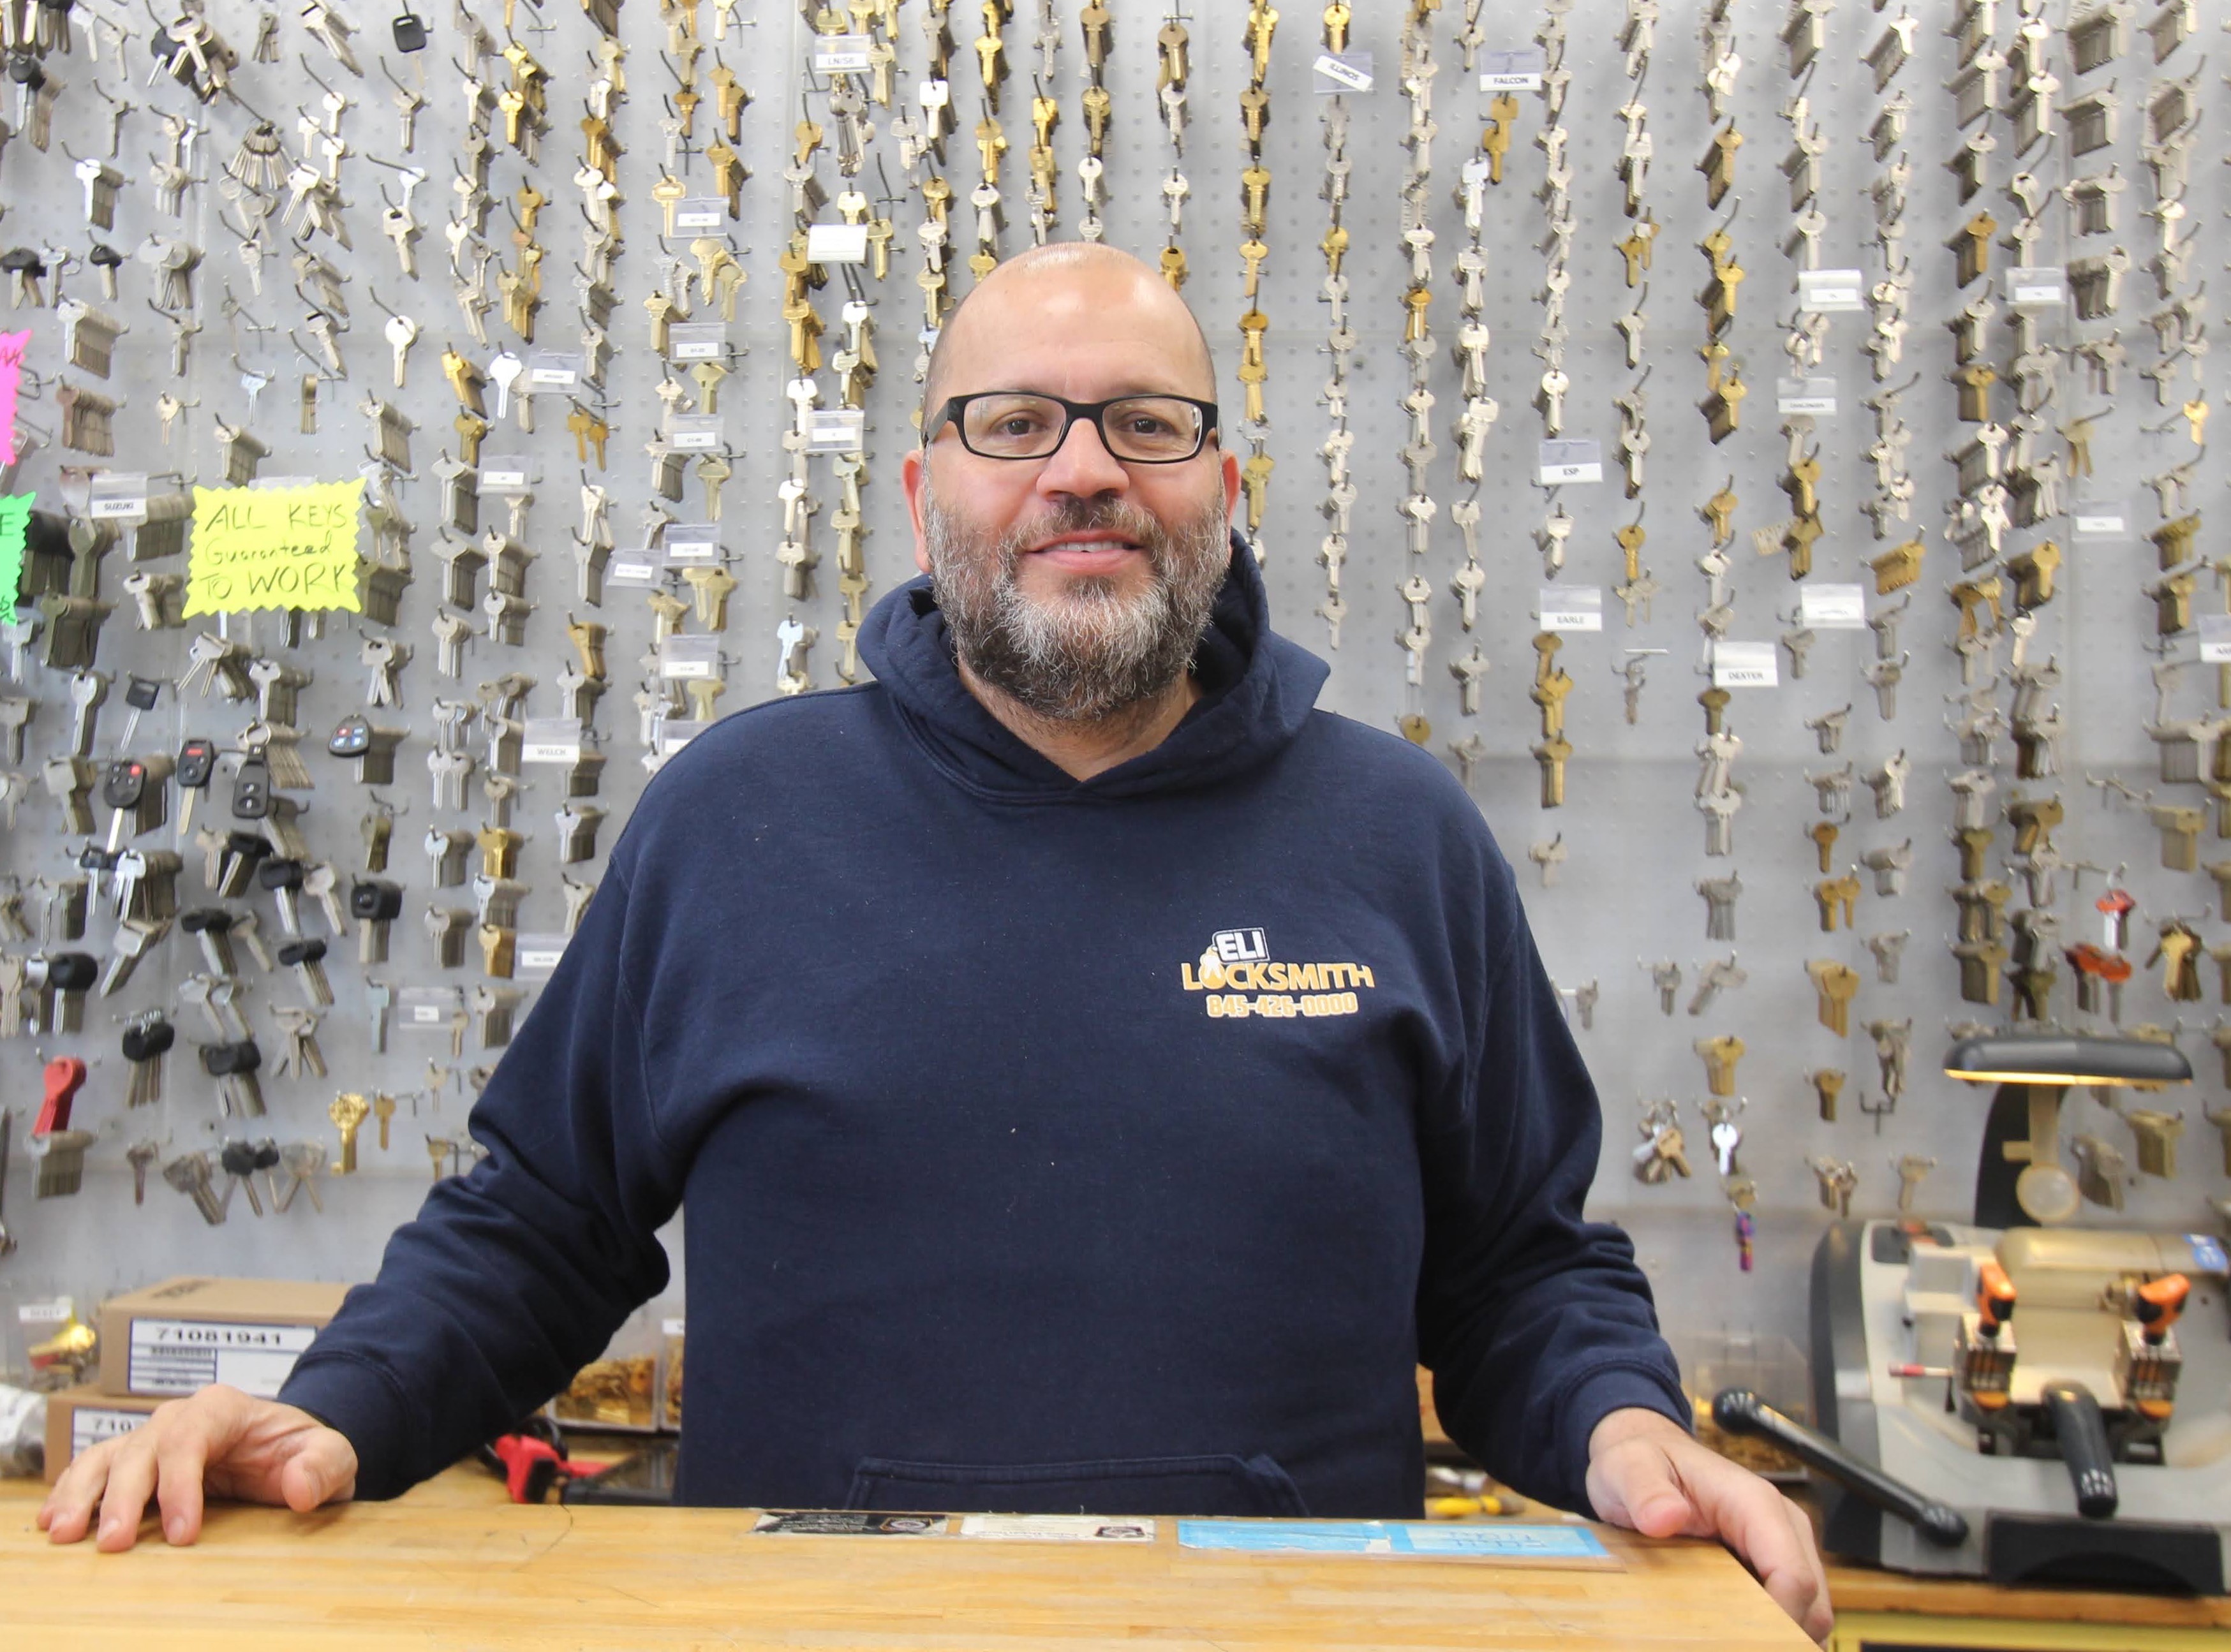 Eli Locksmith: One-Stop-Shop for all of your lock needs